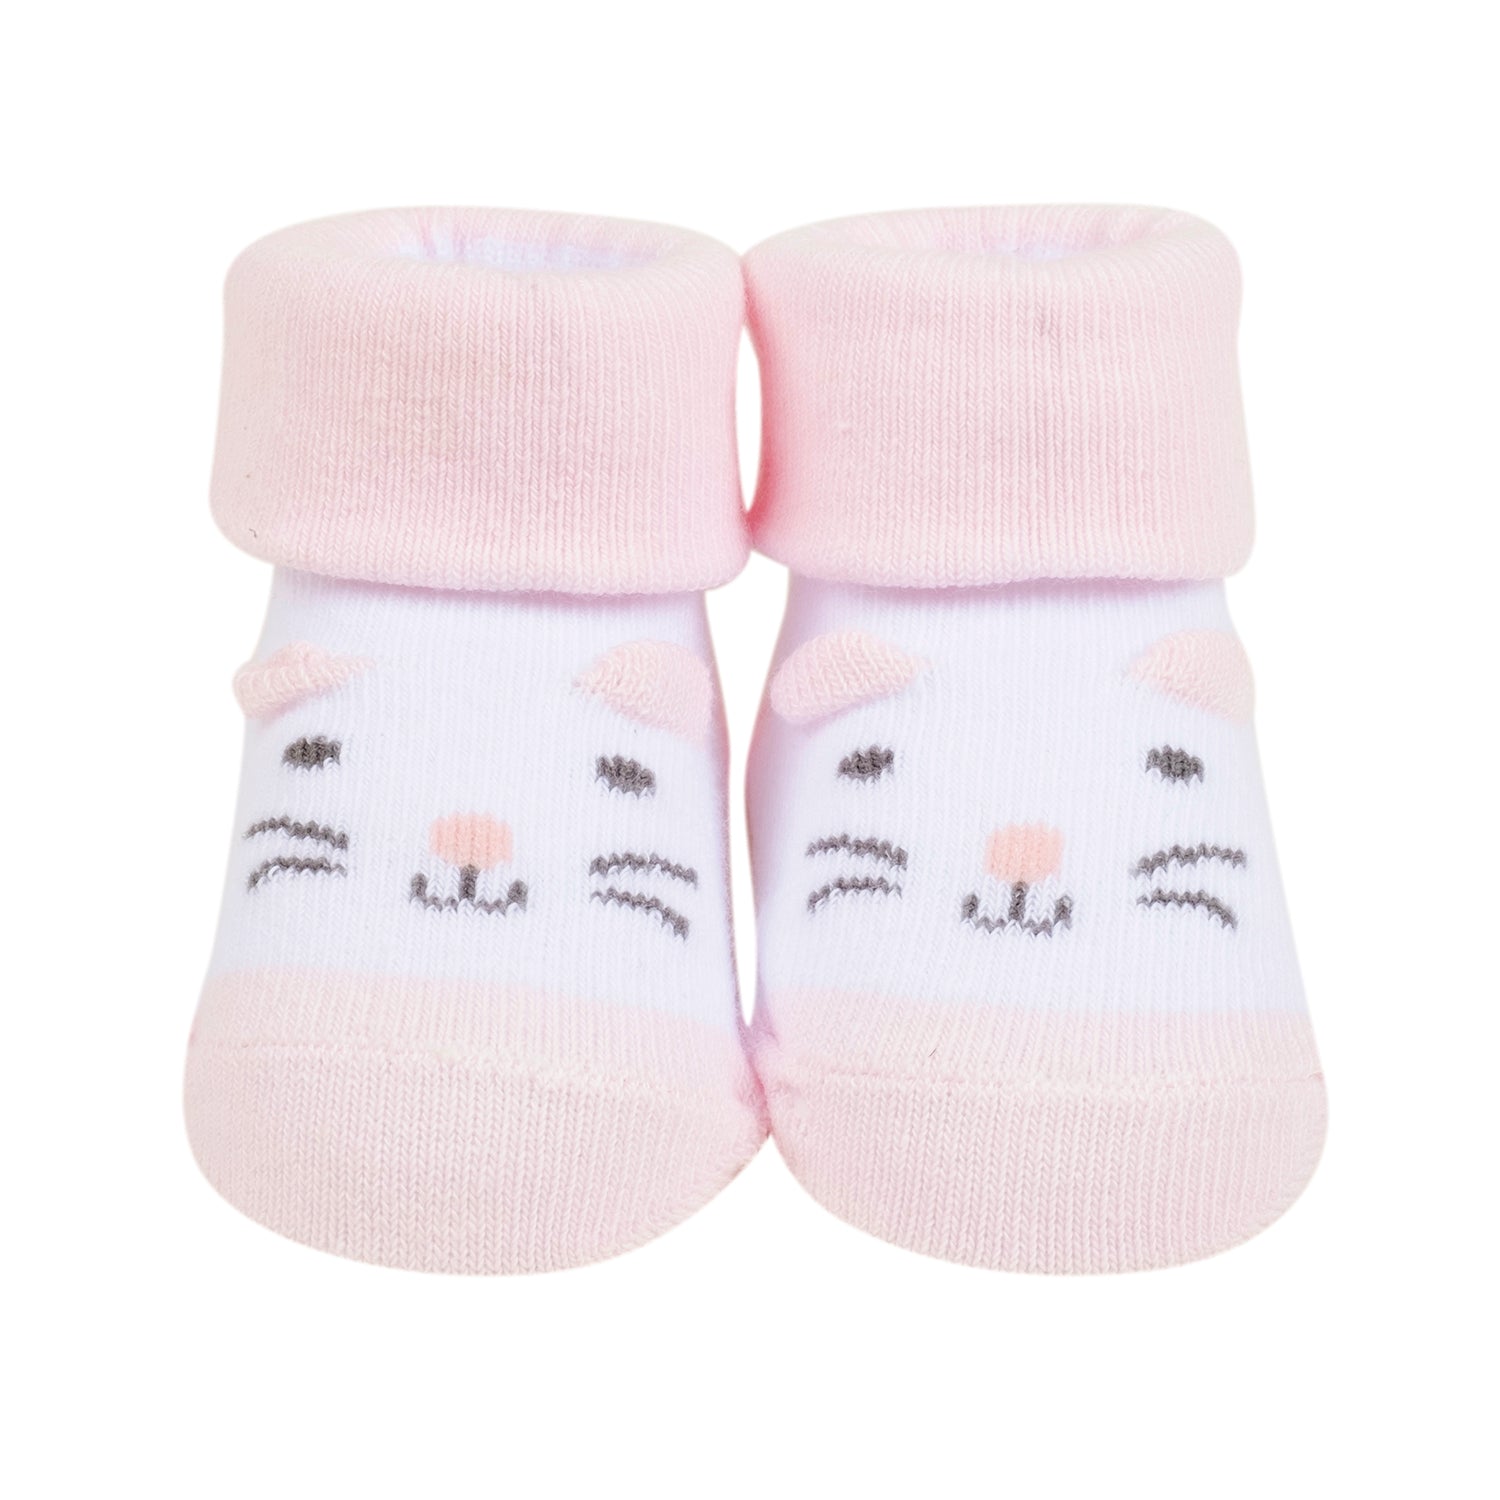 Baby Moo 3D Kitty Dog Cotton Ankle Length Infant Dress Up Walking Set of 2 Socks Booties - Pink